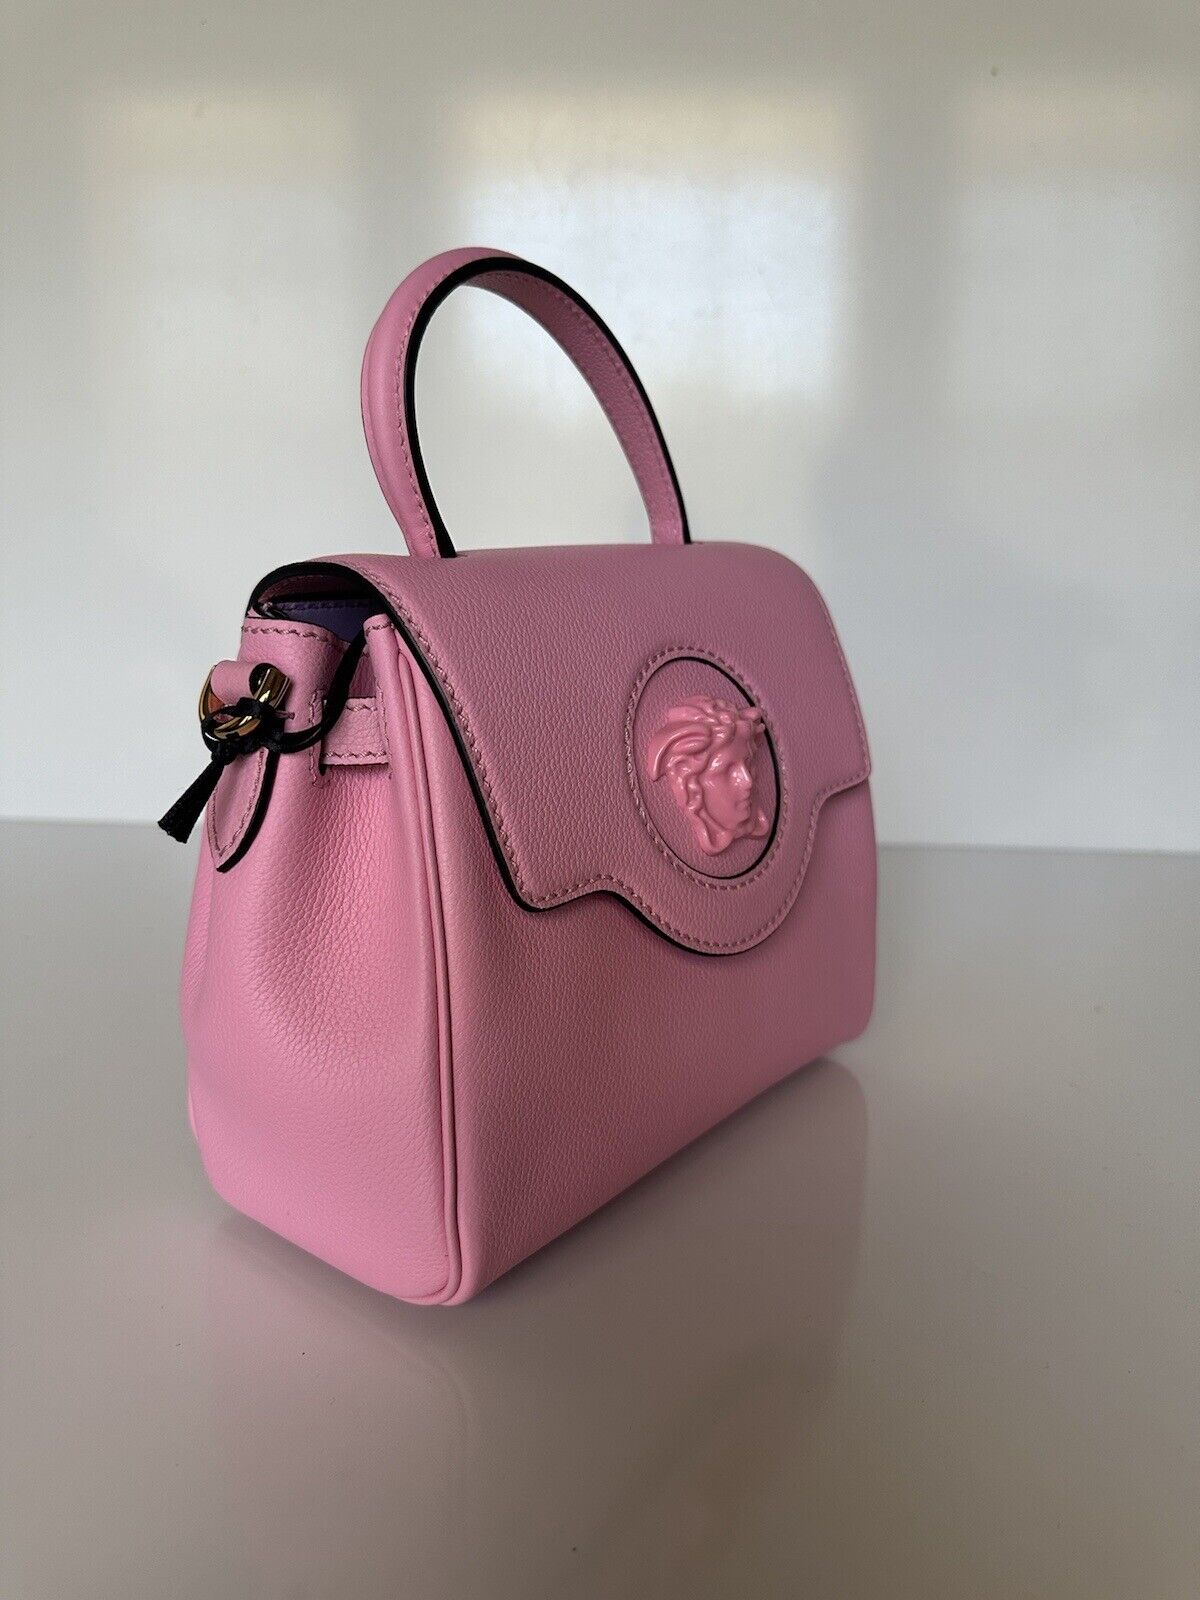 NWT $2125 Versace Top Handle Leather Pink Small Shoulder Bag DBFI040 Italy